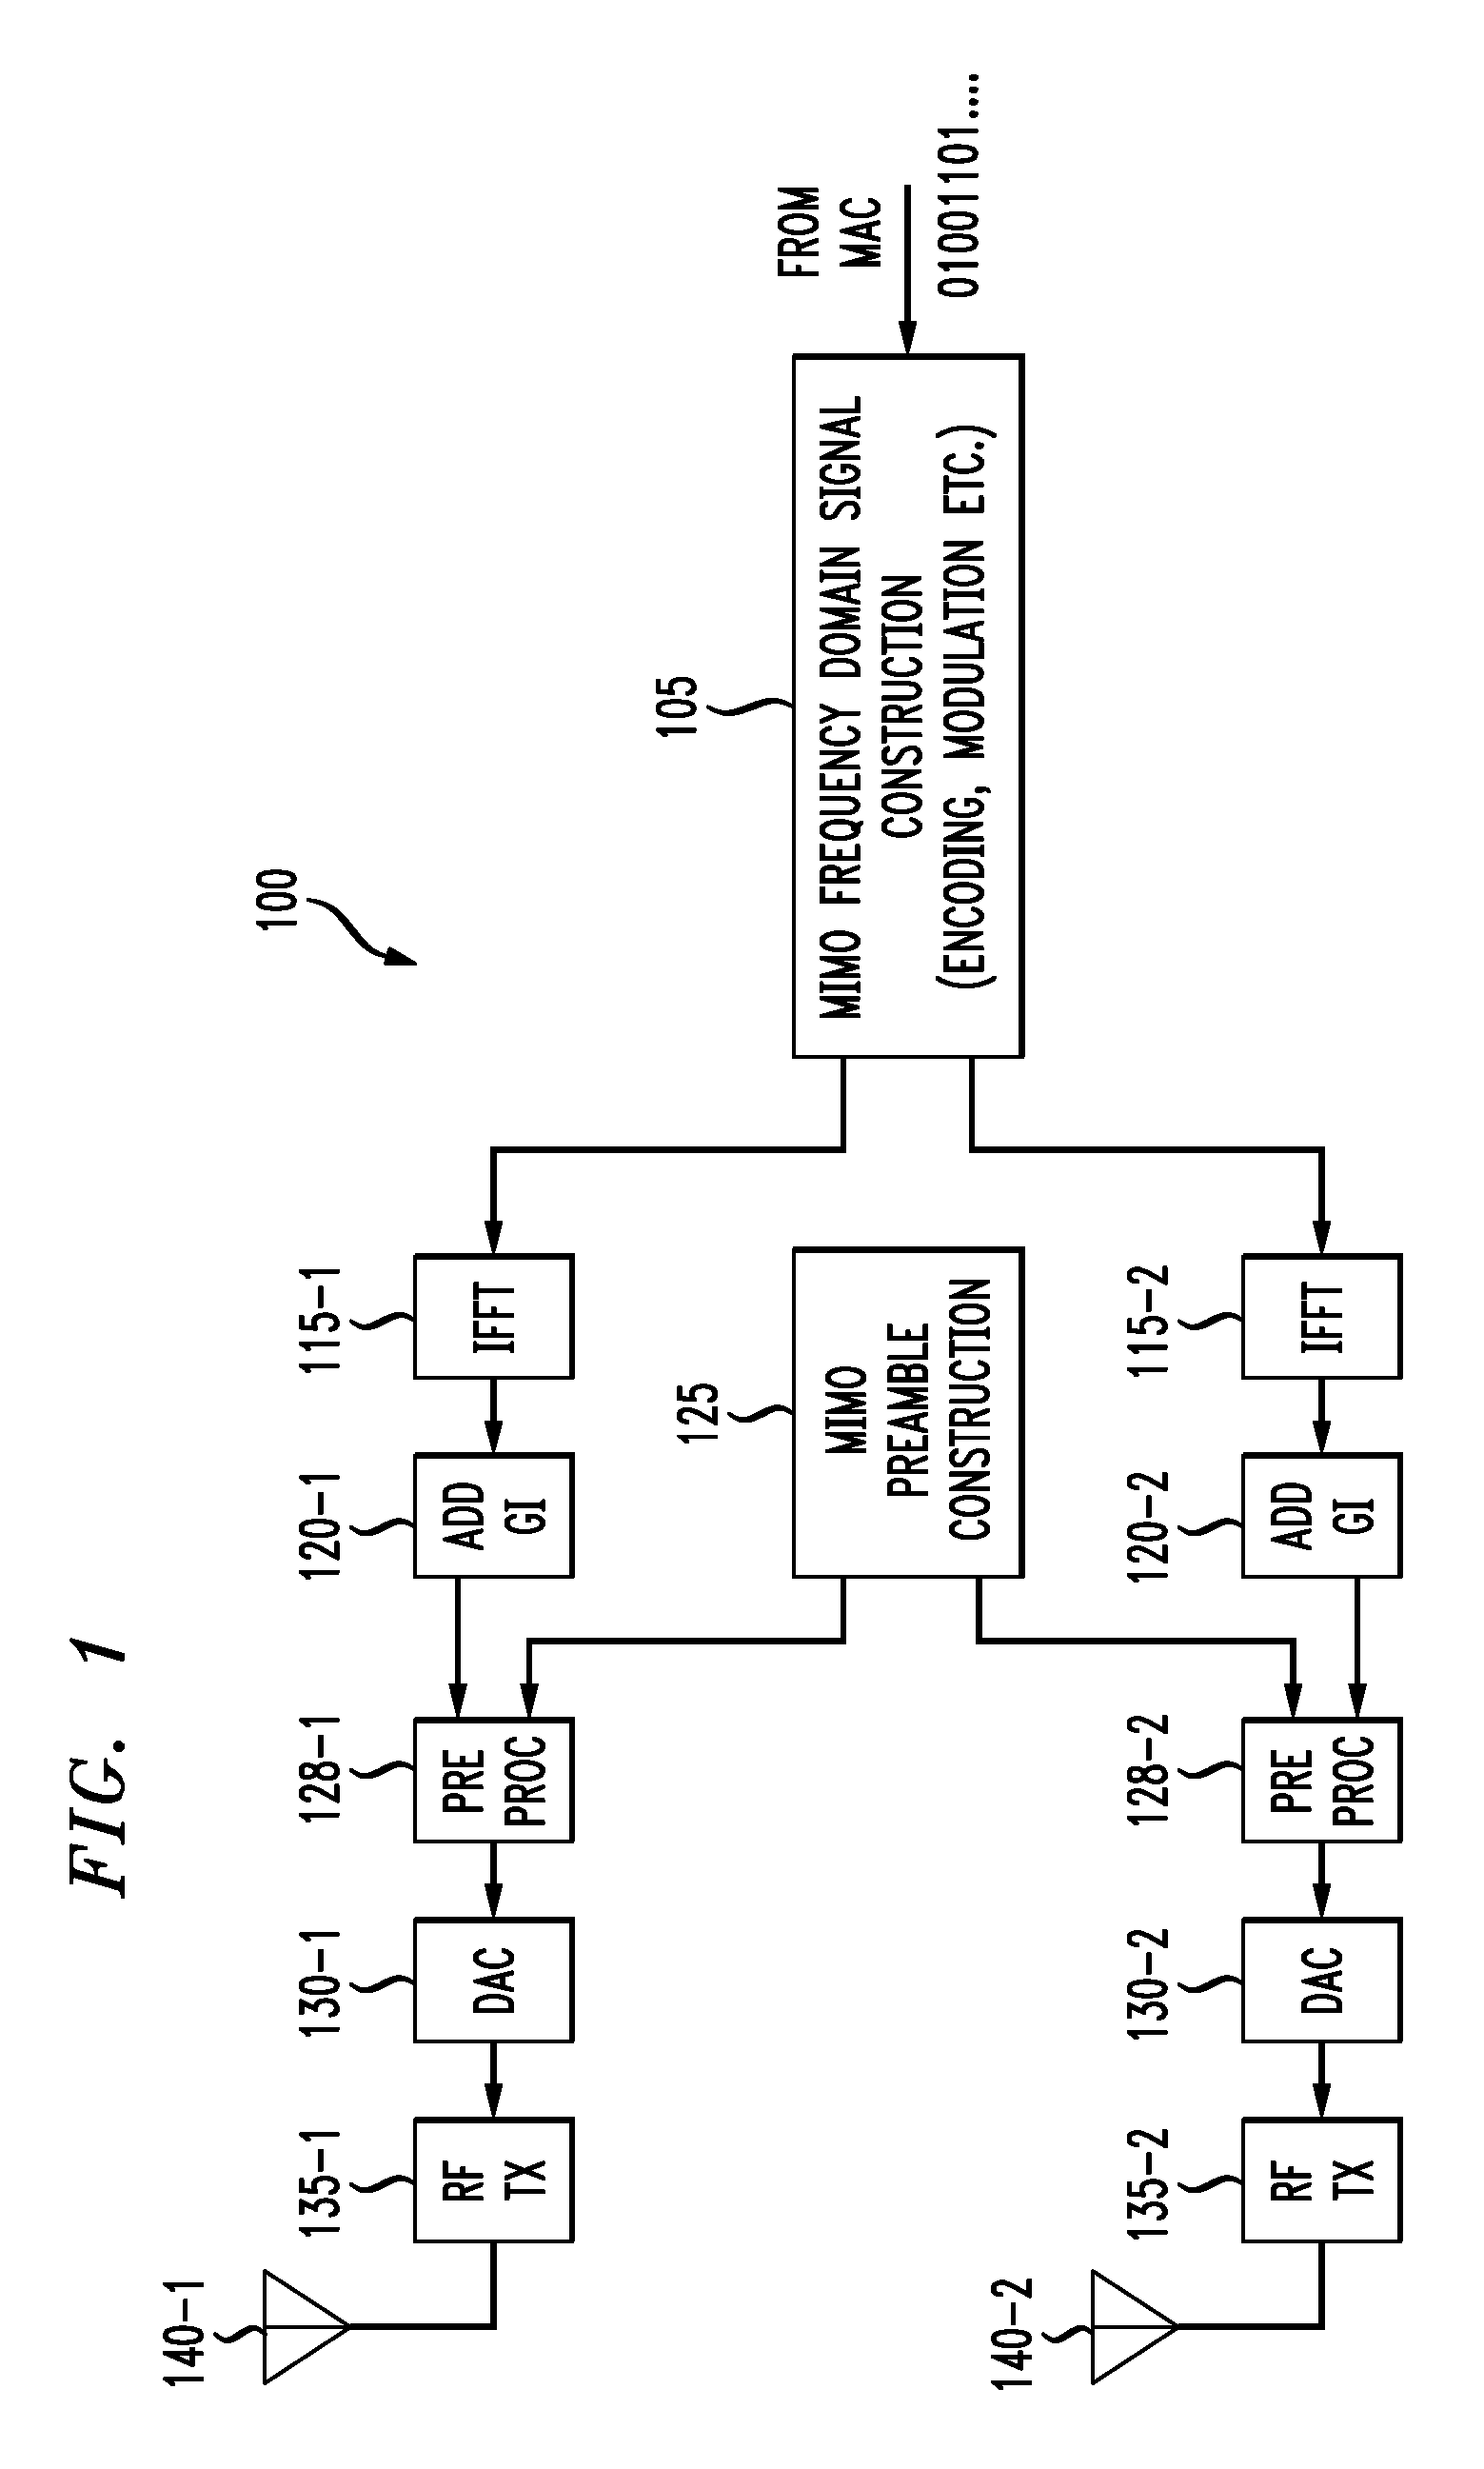 Method and apparatus for improved long preamble formats in a multiple antenna communication system